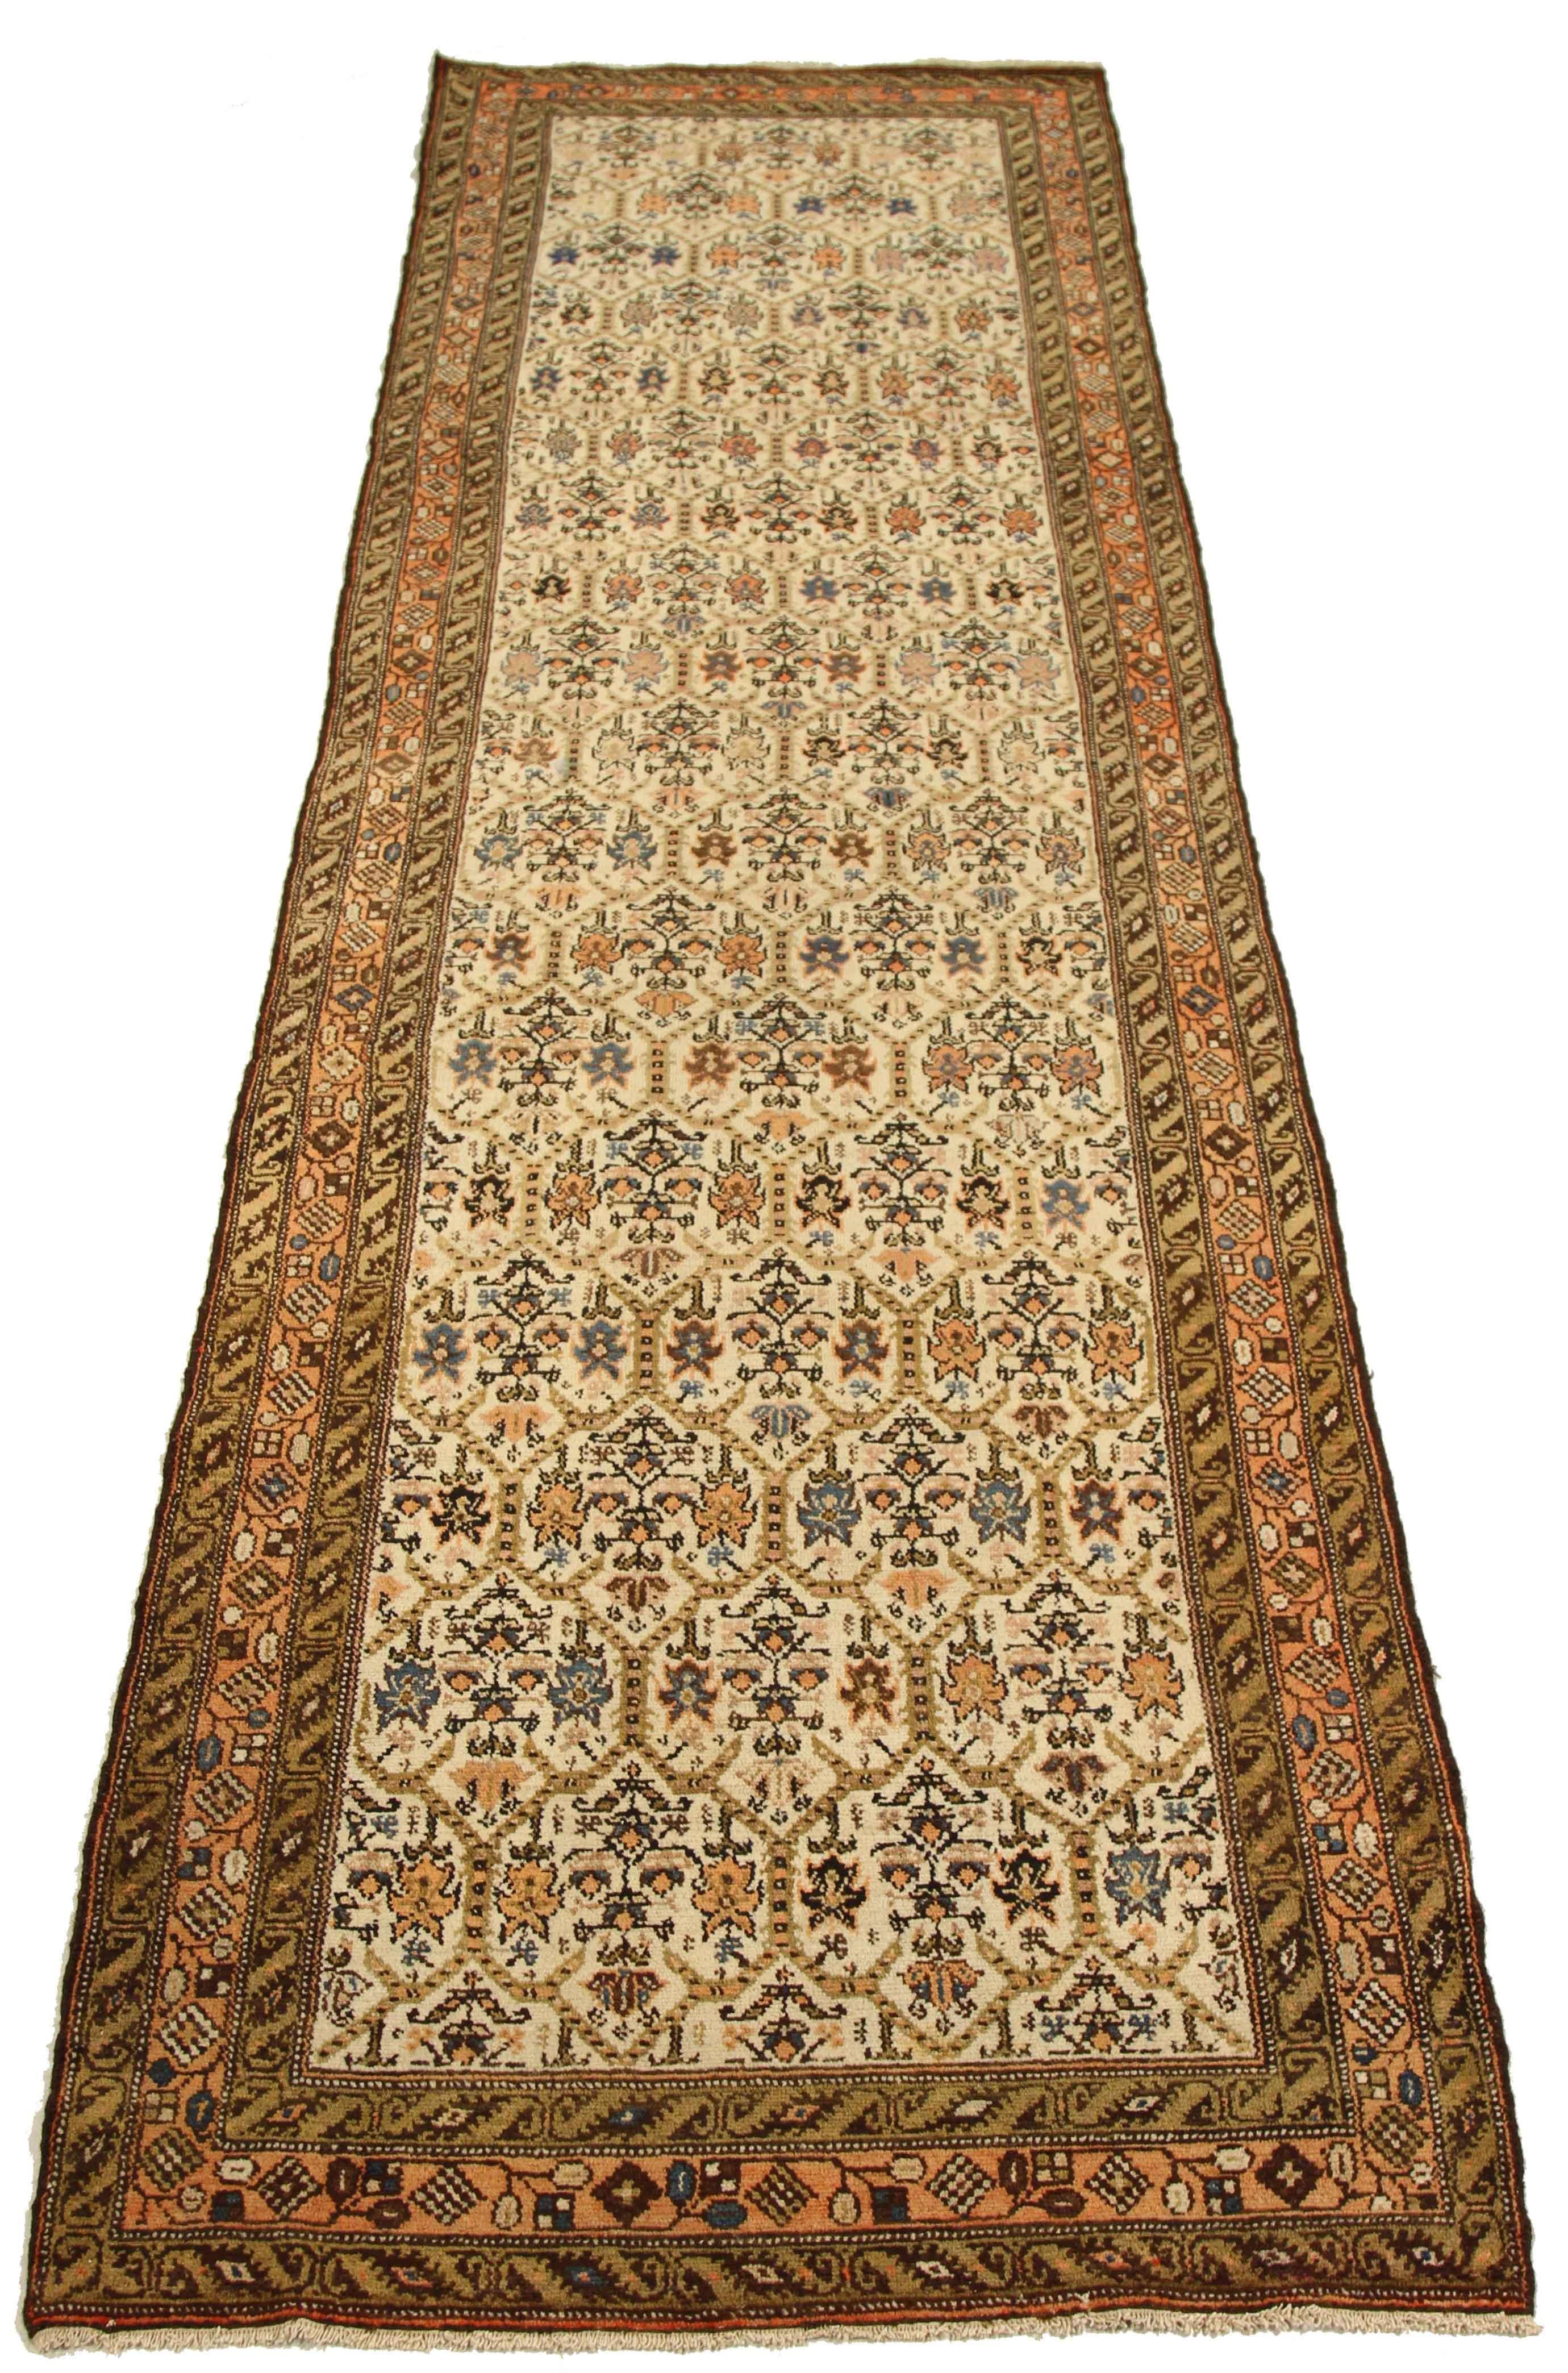 Hand-Knotted Antique Persian Rug Malayer Design with Rich Floral Patterns, circa 1930s For Sale